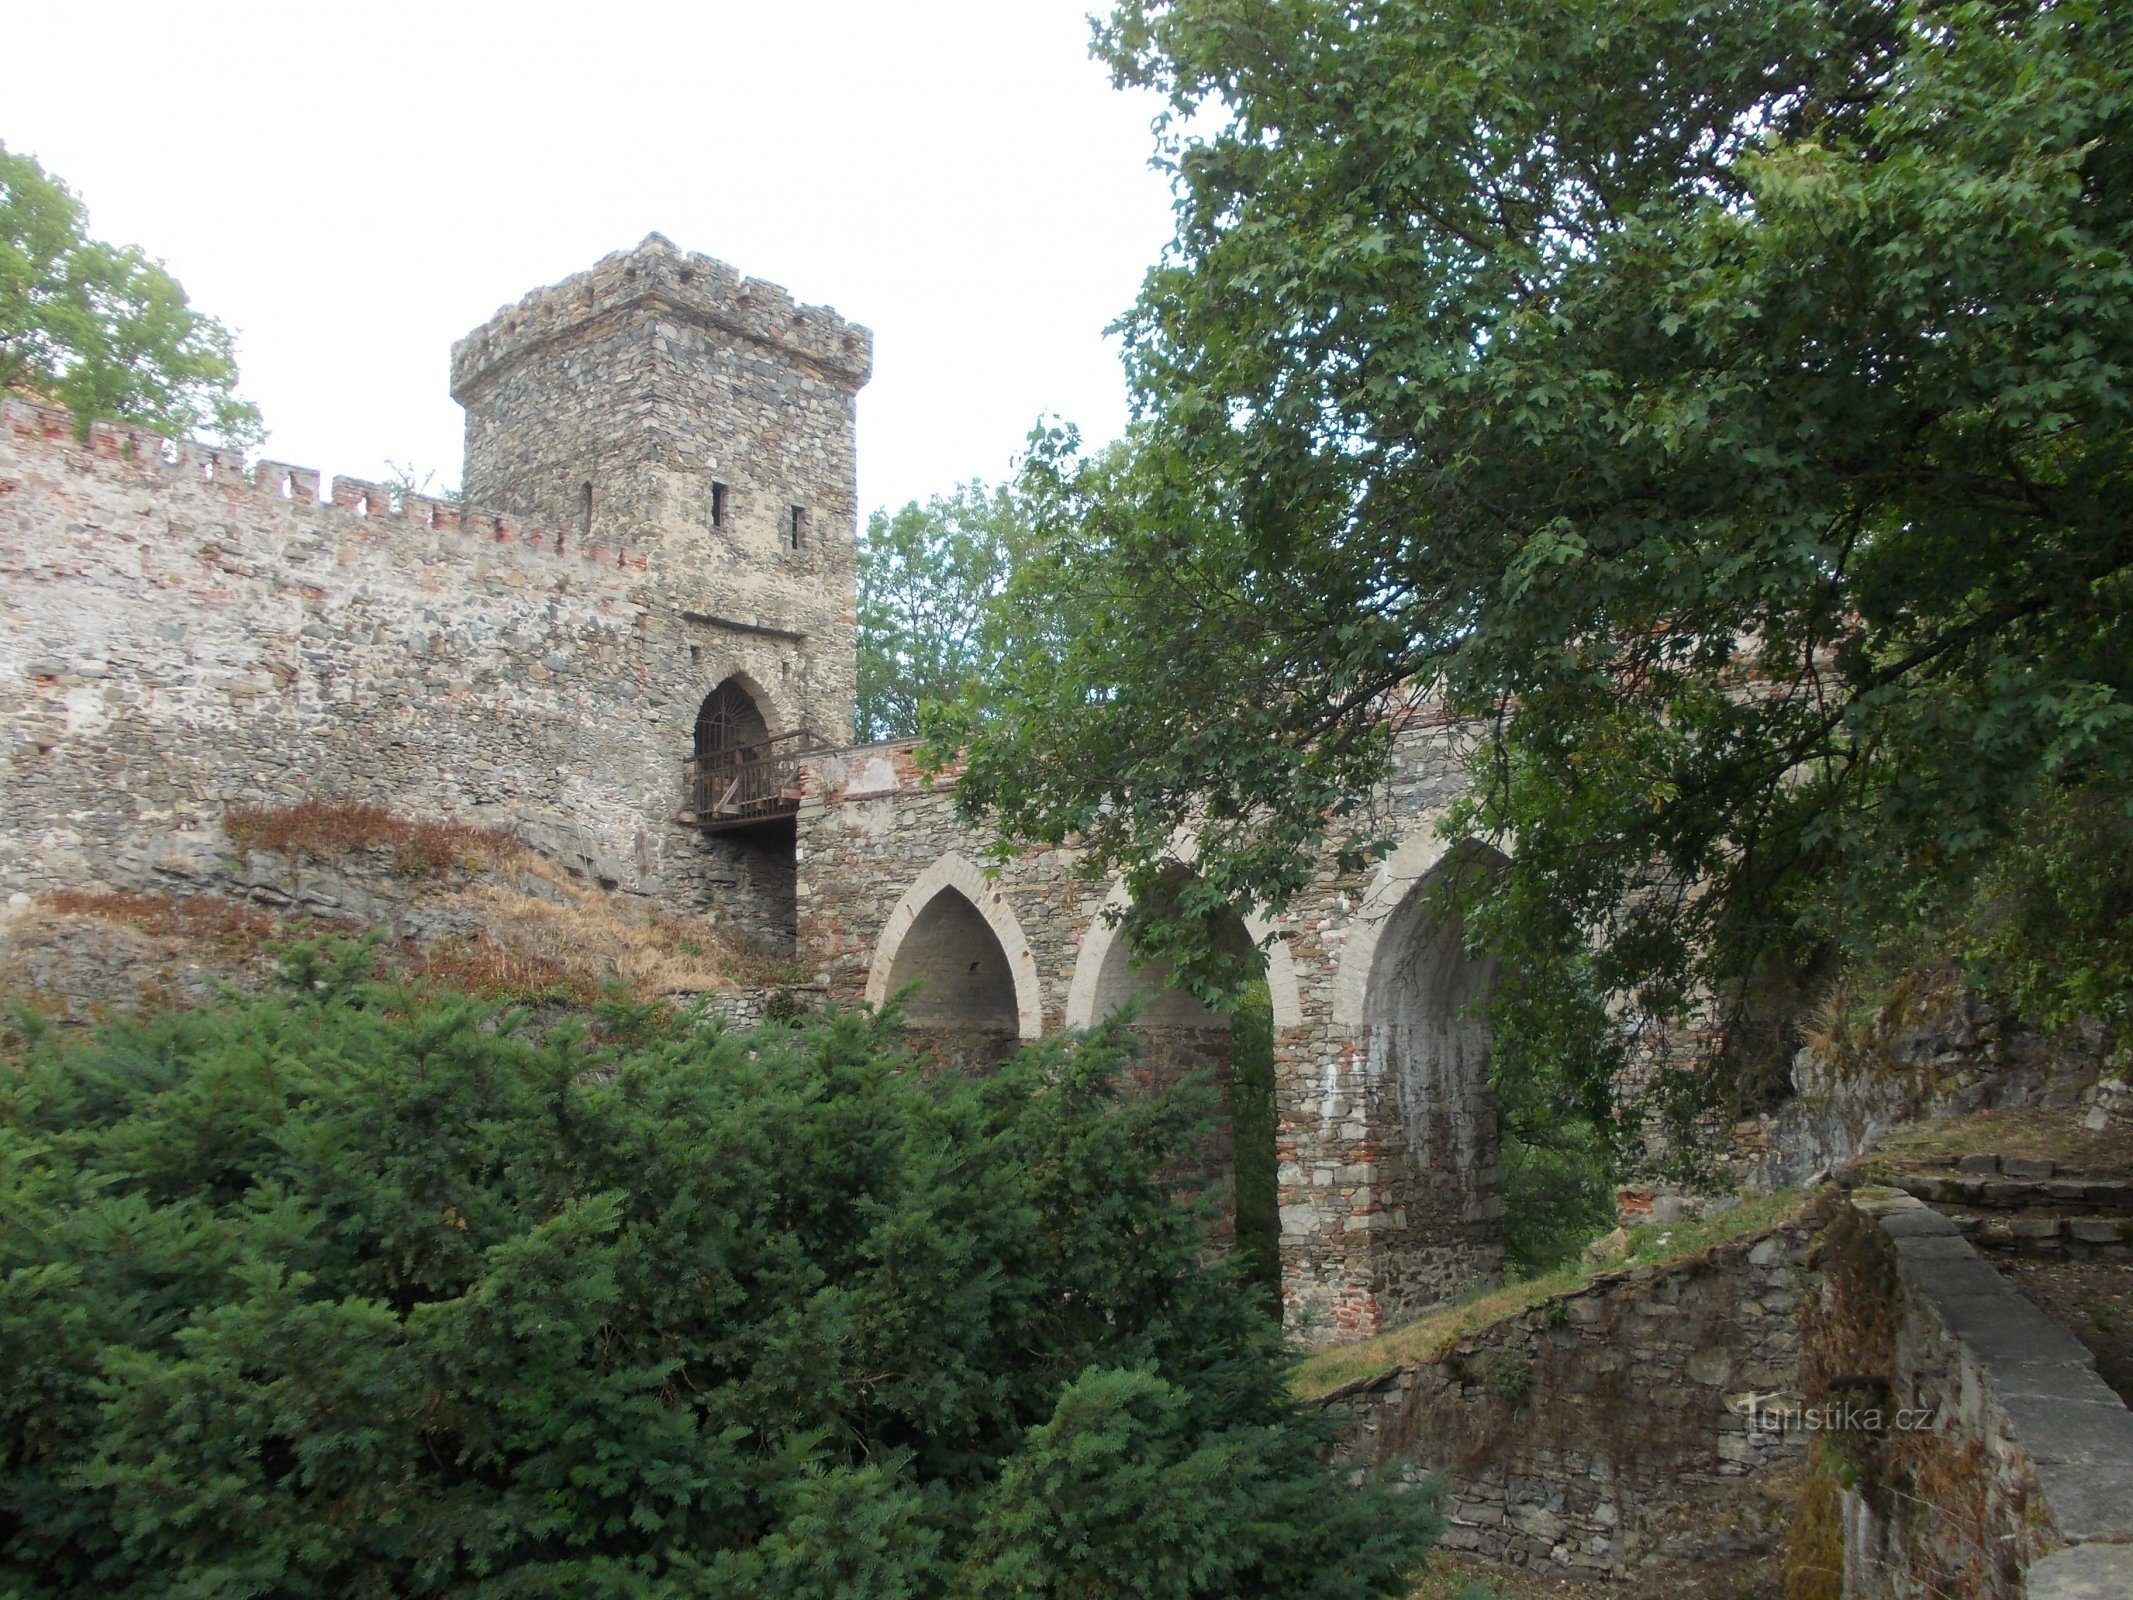 castle walls and the approach road over the bridge to the castle